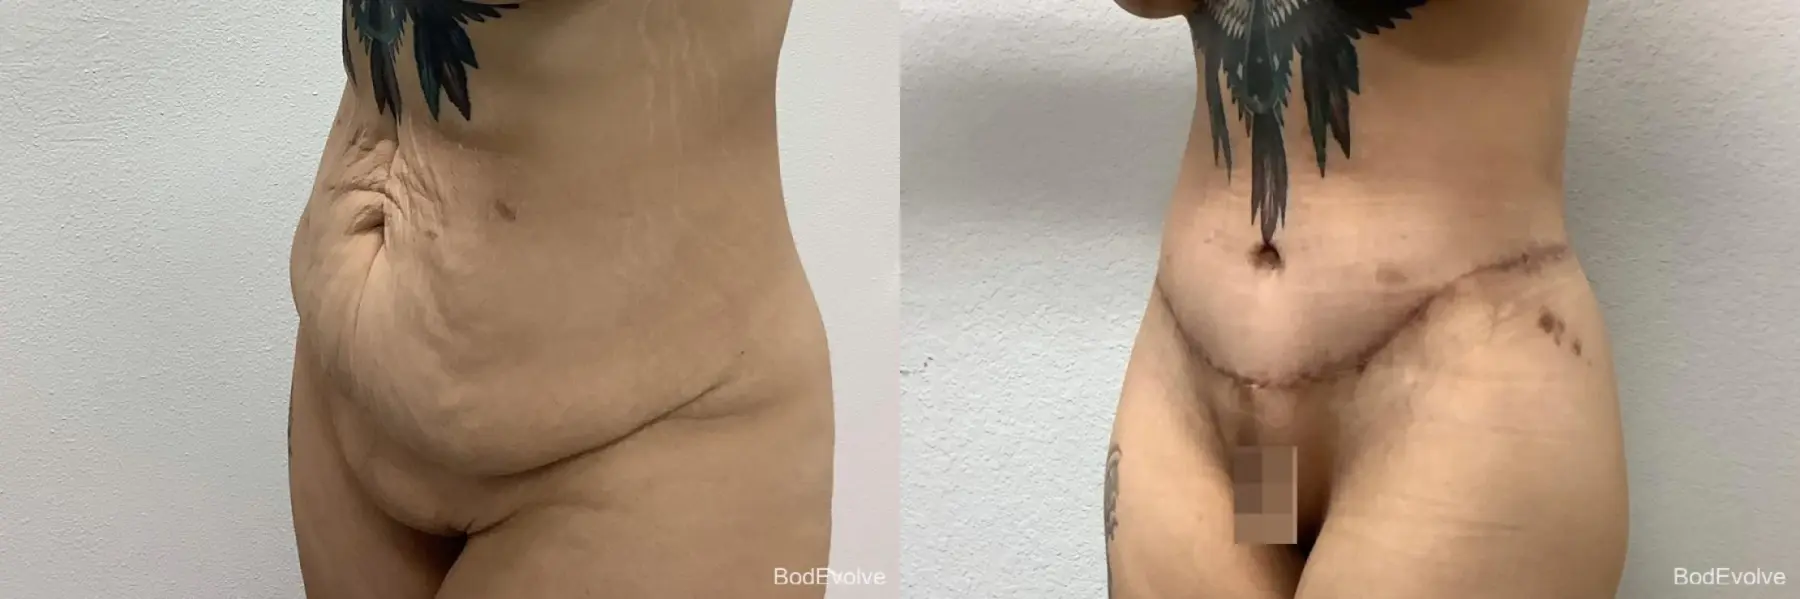 Body Lift: Patient 2 - Before and After 2